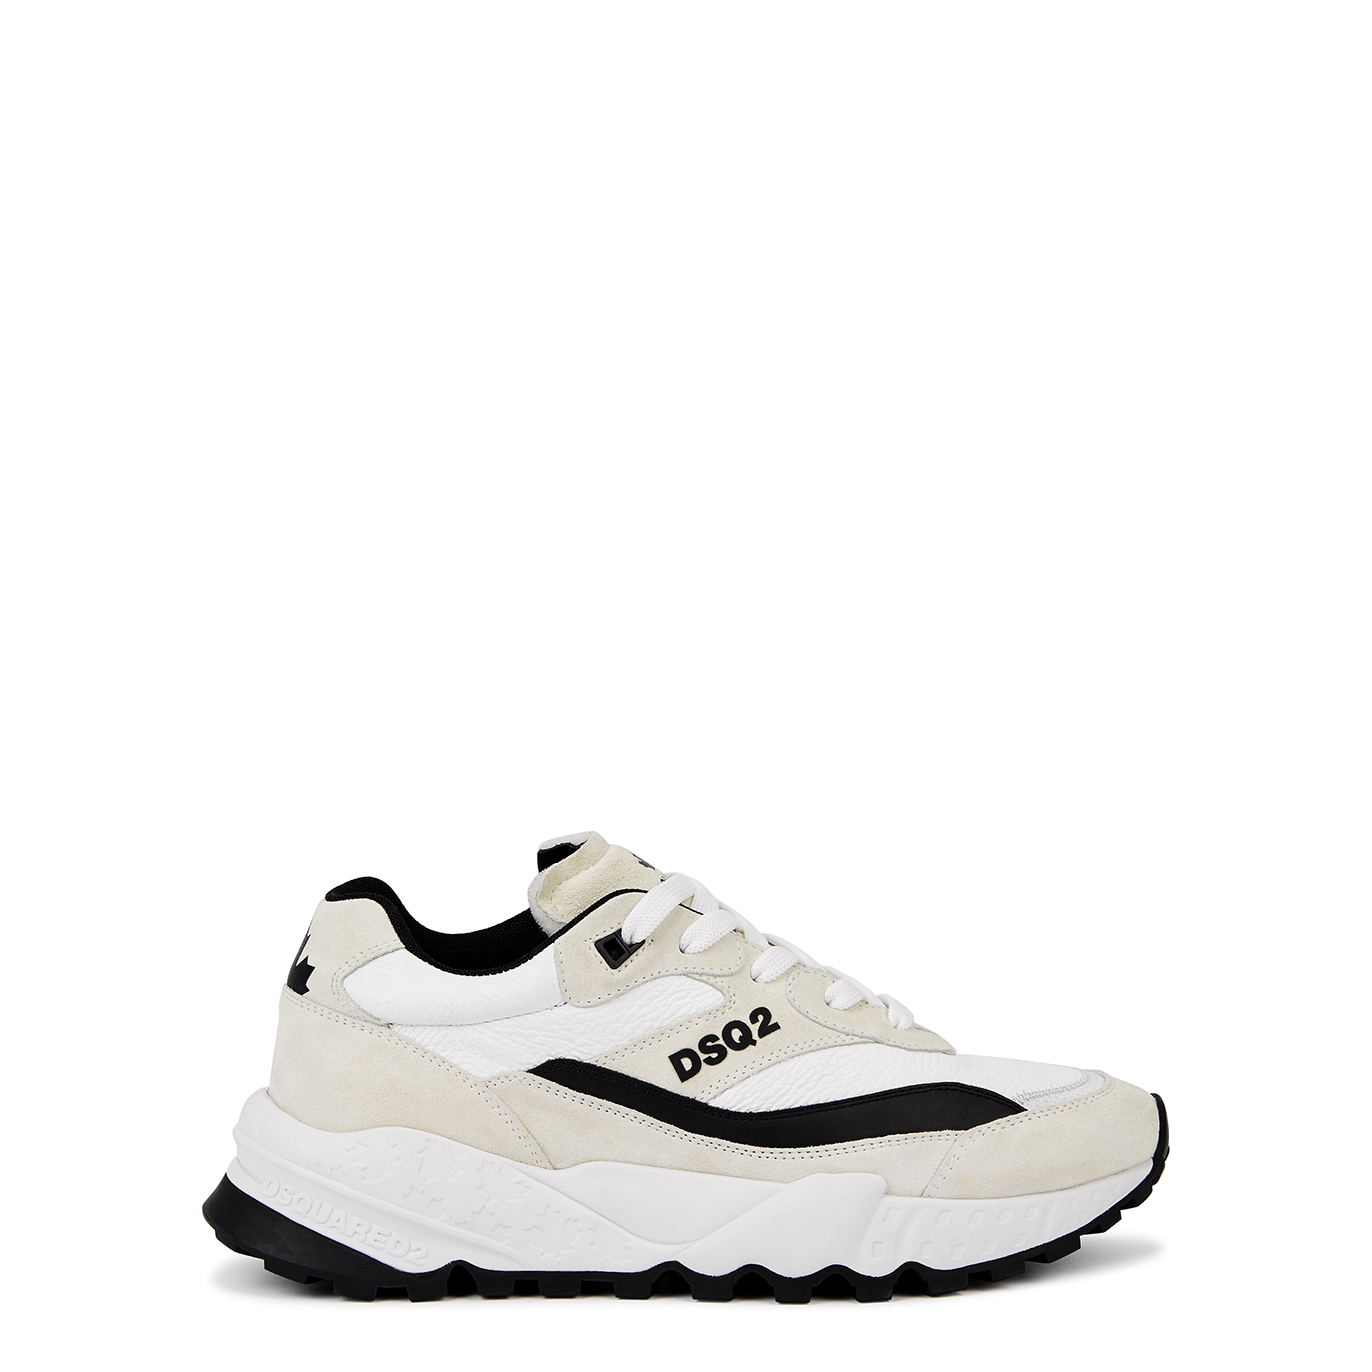 Dsquared2 Free White Panelled Leather Sneakers - White And Black - 8